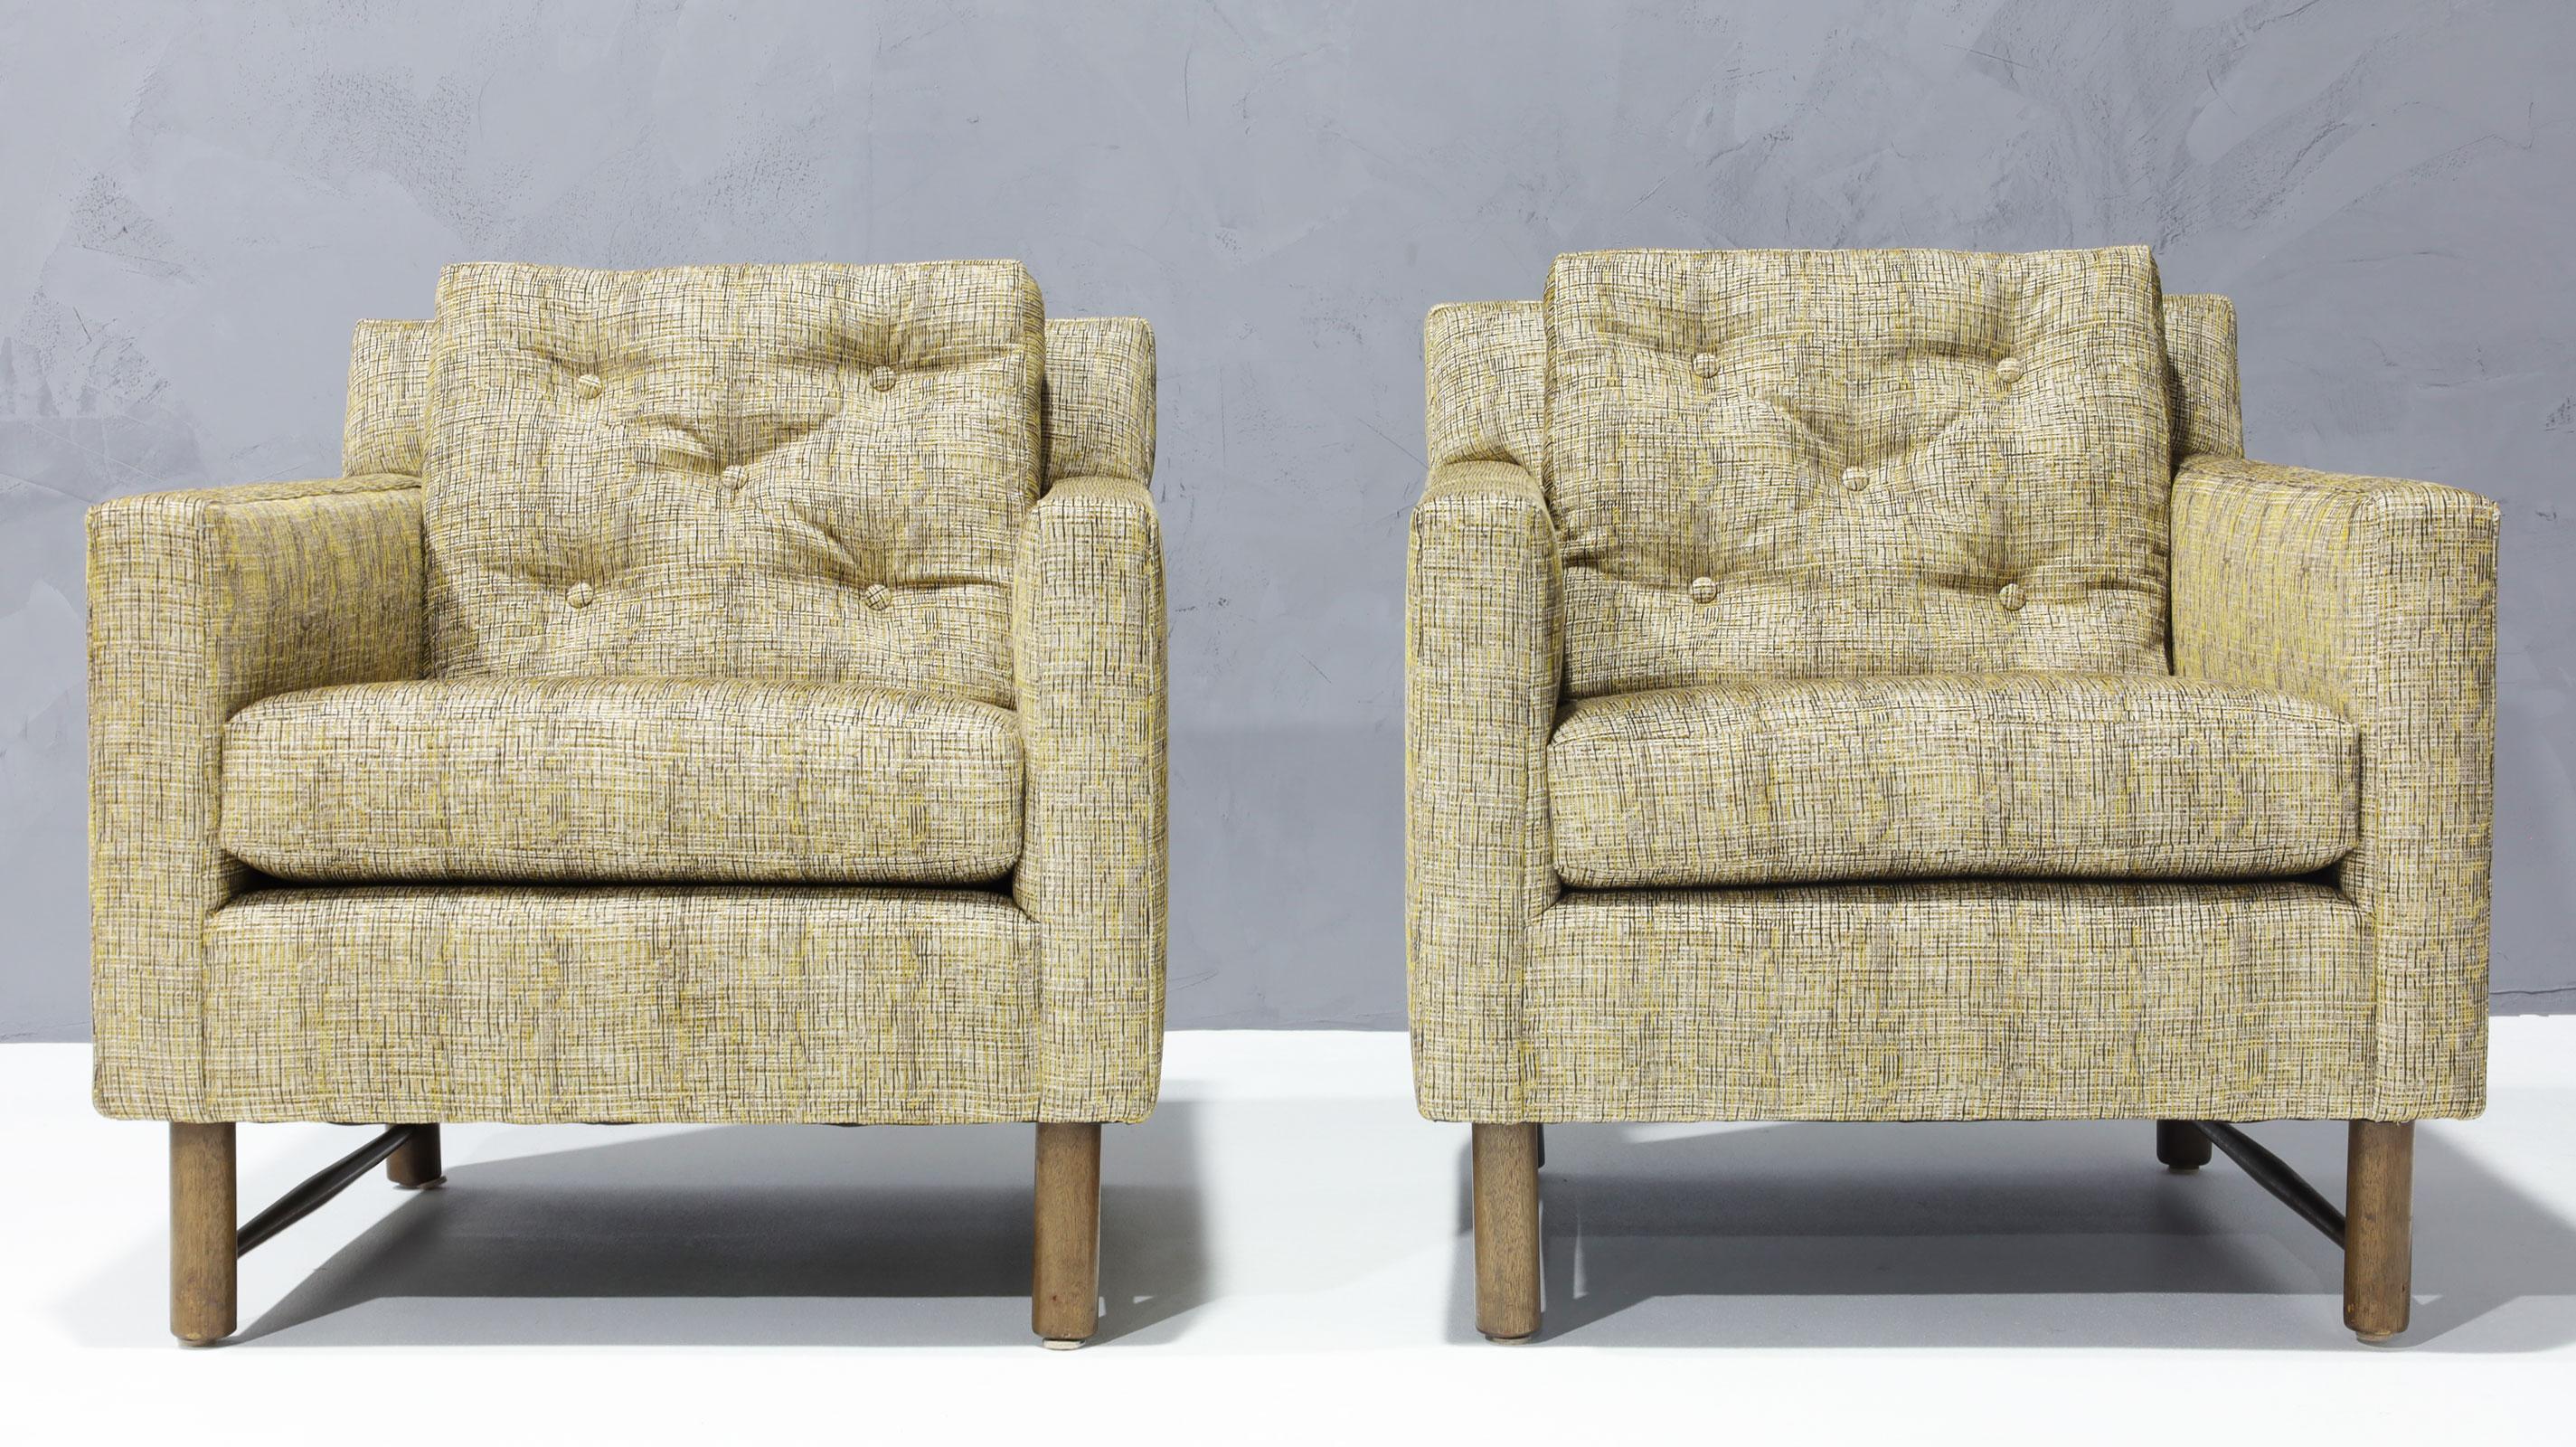 We love these gorgeous chairs by Edward Wormely for Dunbar. A hard to find pair ! They are super comfortable. We have done these in a high-end French fabric. The chairs pair beautifully with the Dunbar mohair sofa seen in the photos. All set and